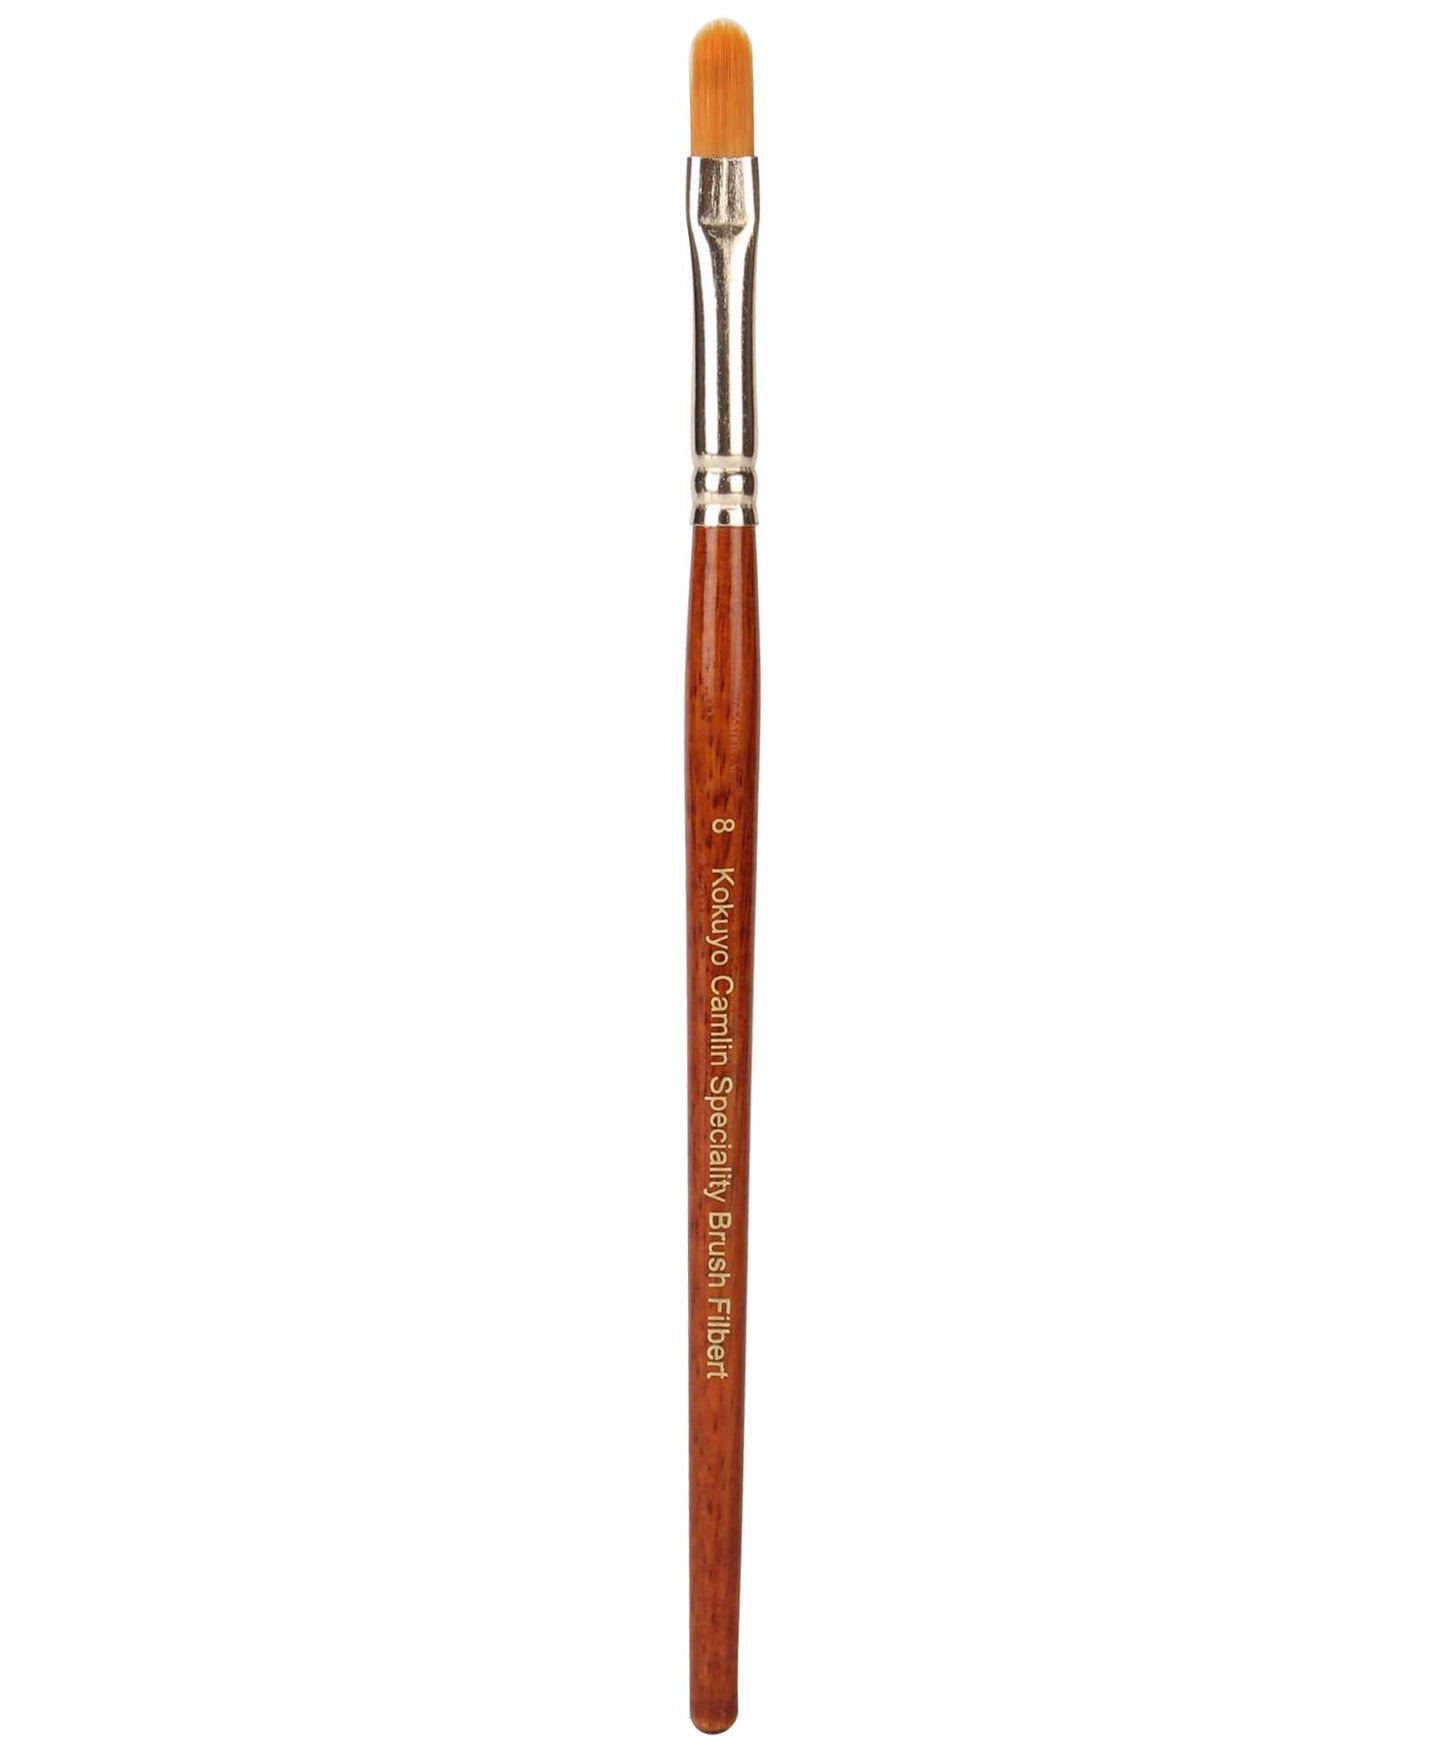 Camlin Speciality Series Brush (Loose)